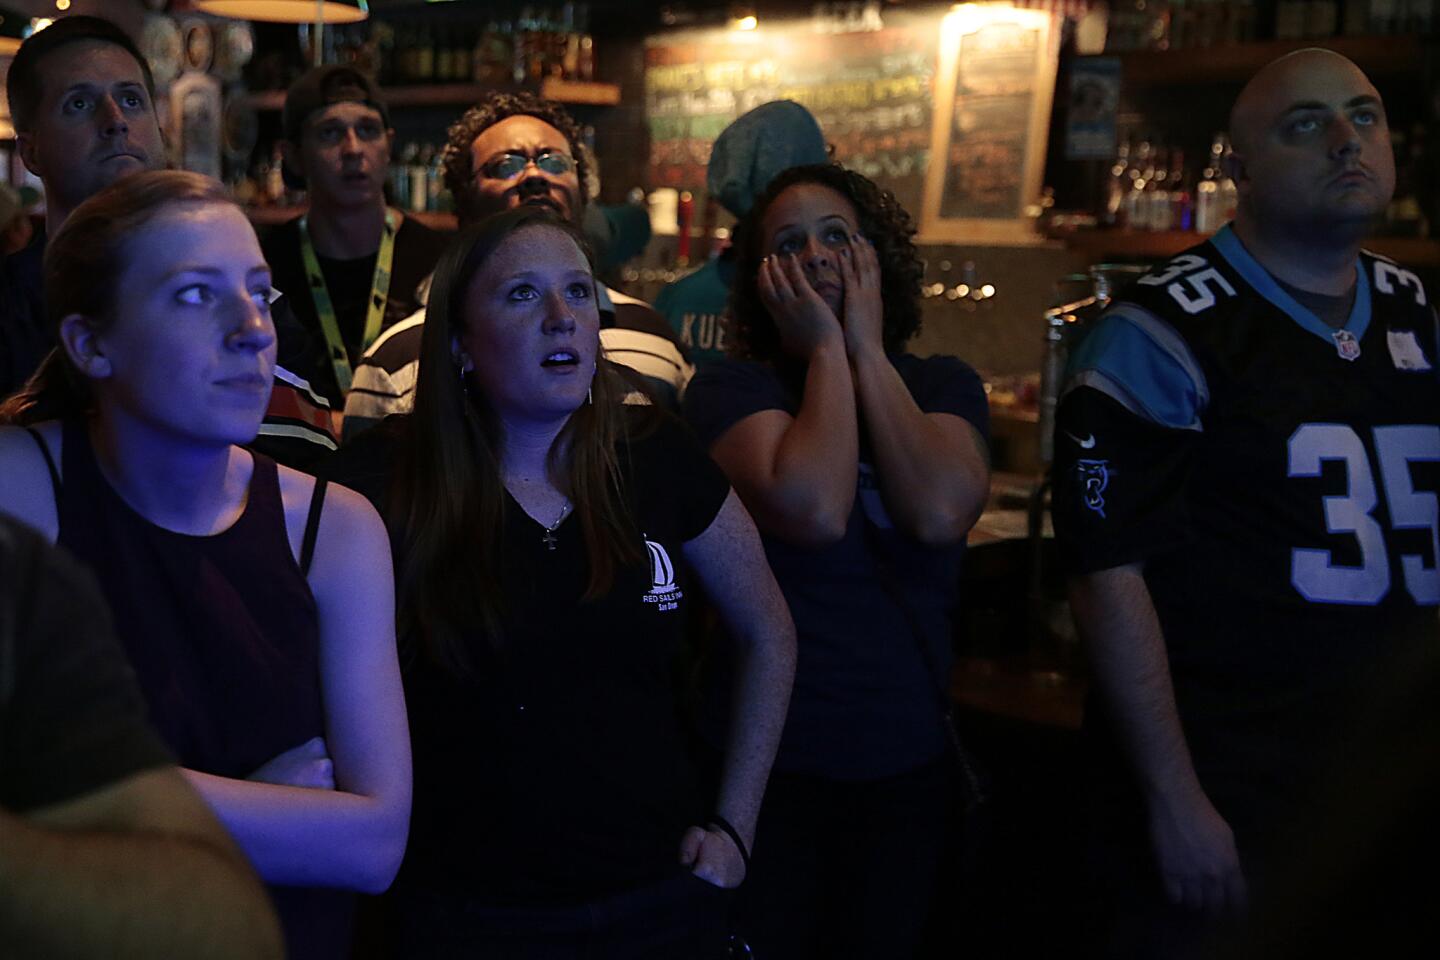 Carolina Panthers fans watch Super Bowl 50 during a pensive moment at Beelman's Pub in downtown Los Angeles. Most of the fans at Beelman's are part of the Roaring Riot, the largest unofficial Panthers fan union in the nation.